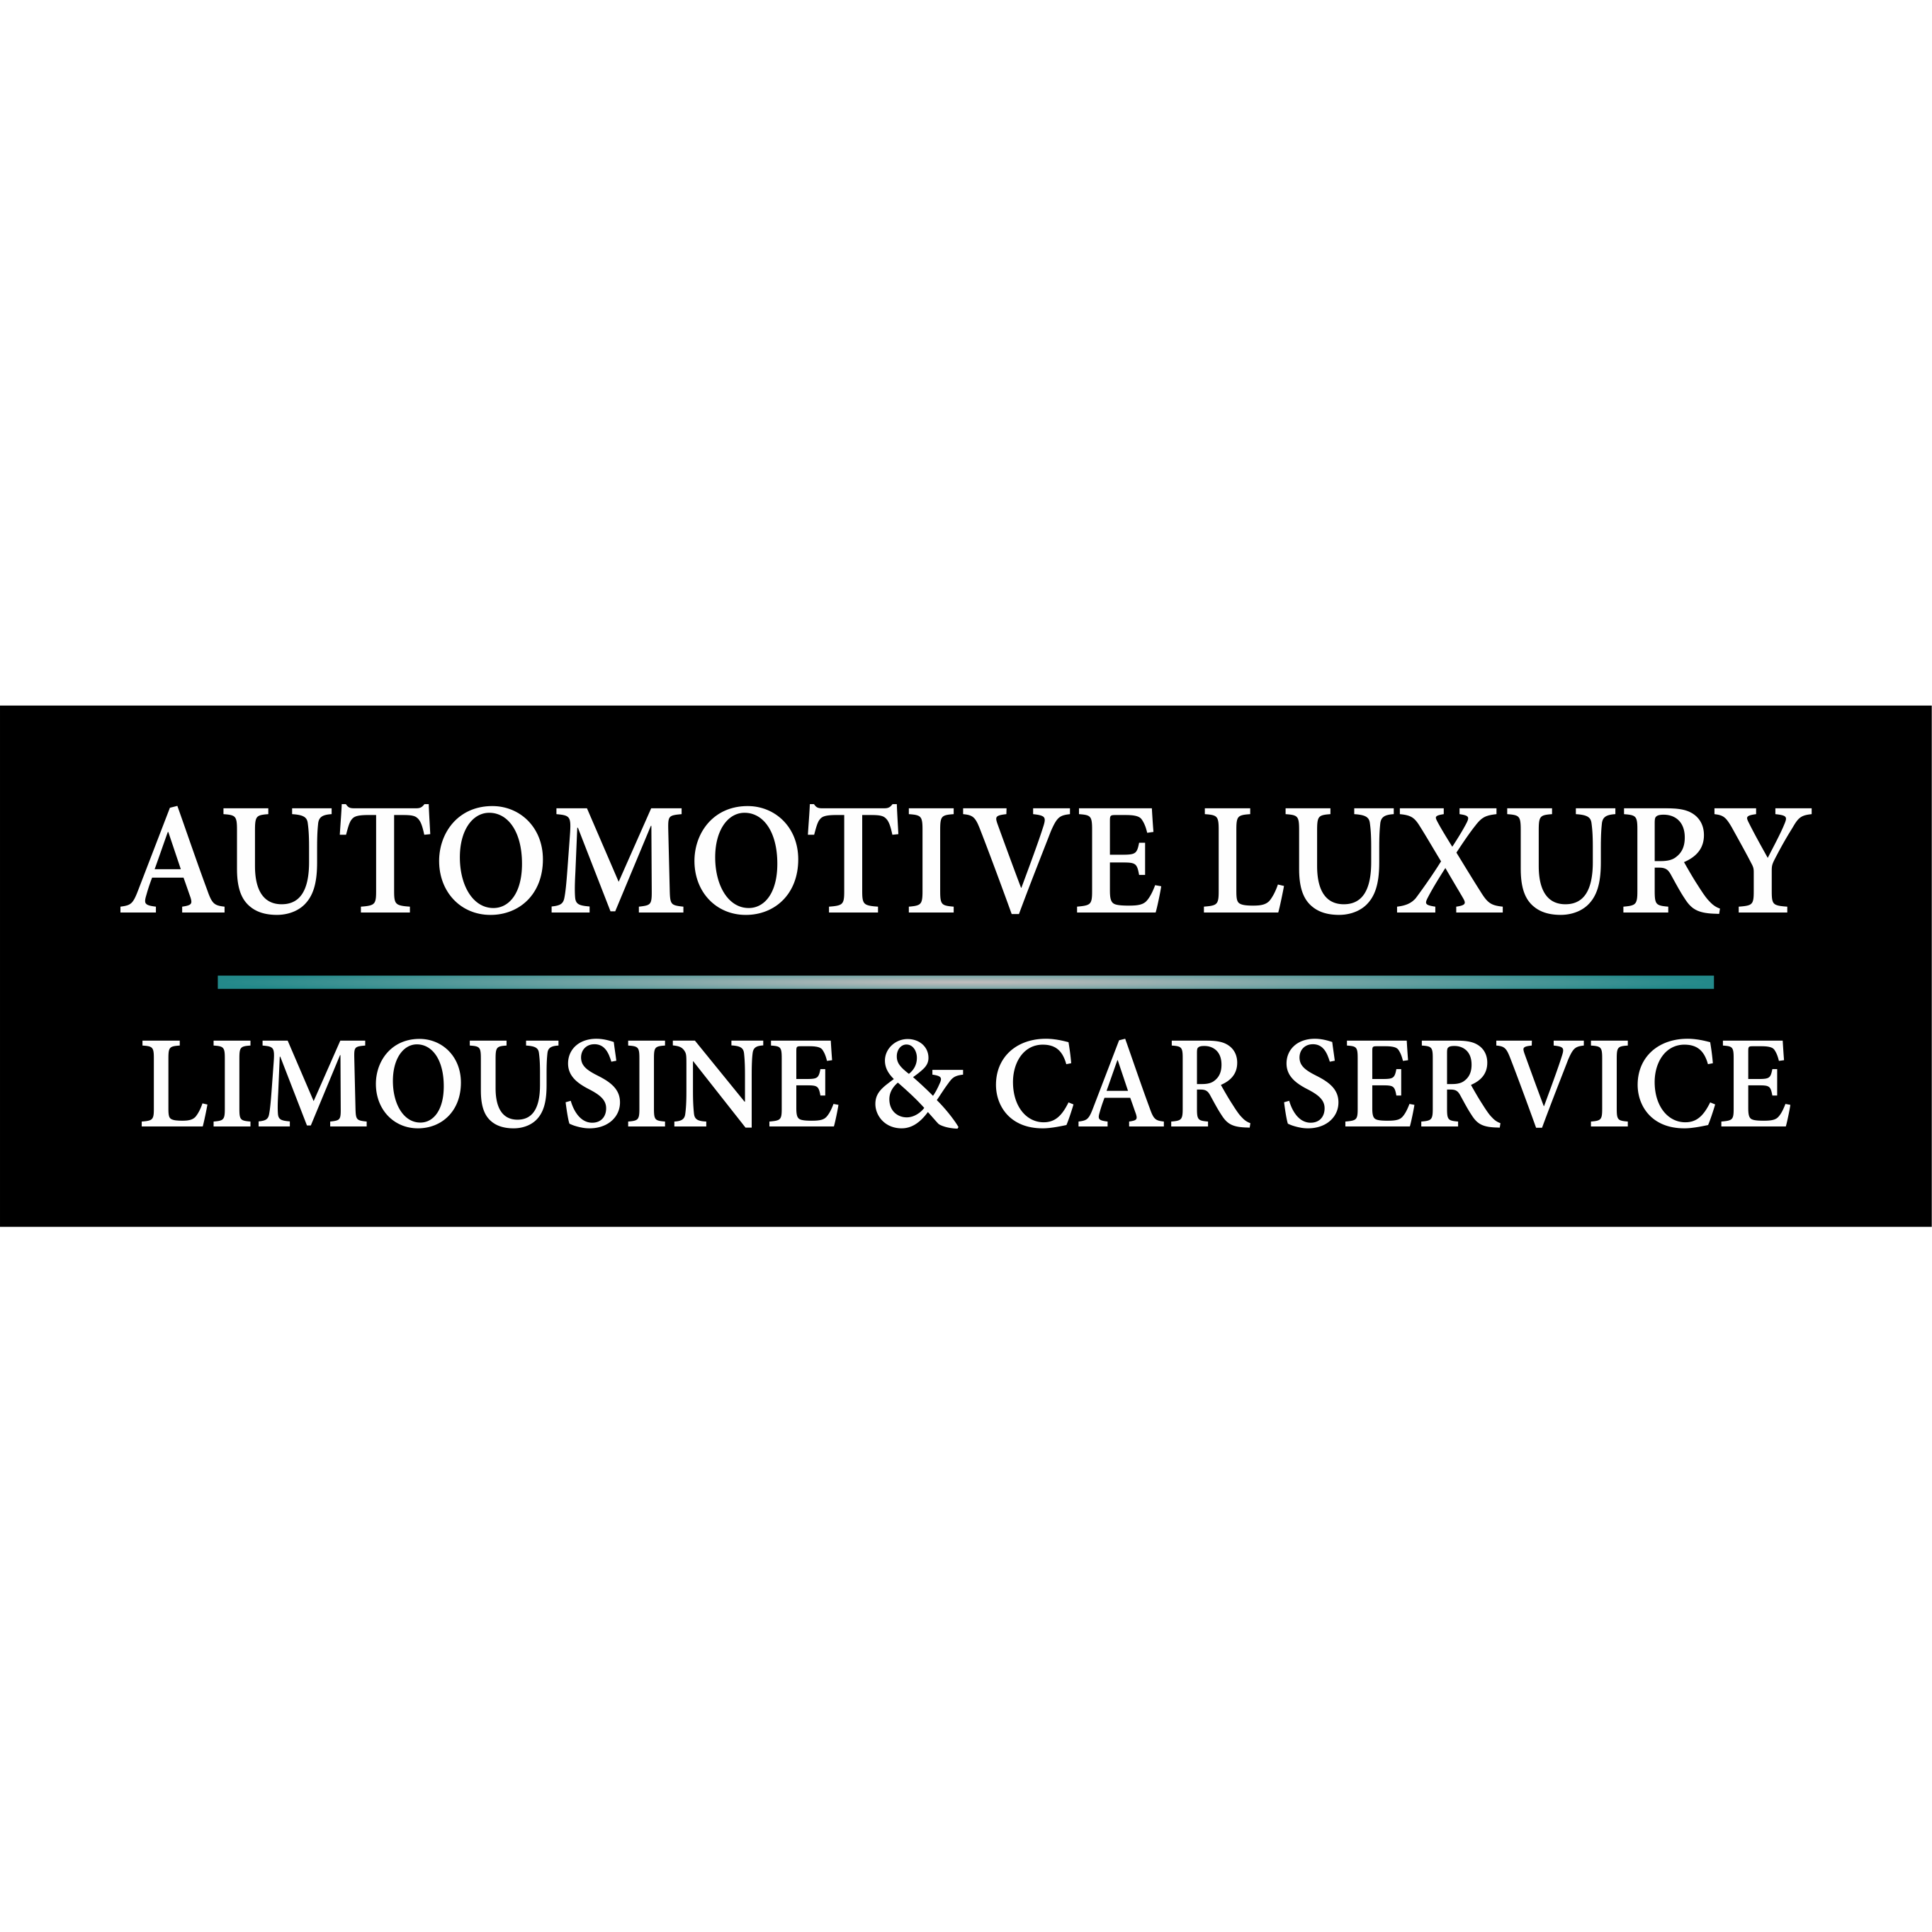 Automotive Luxury Limo and Car Service New York (800)516-1134